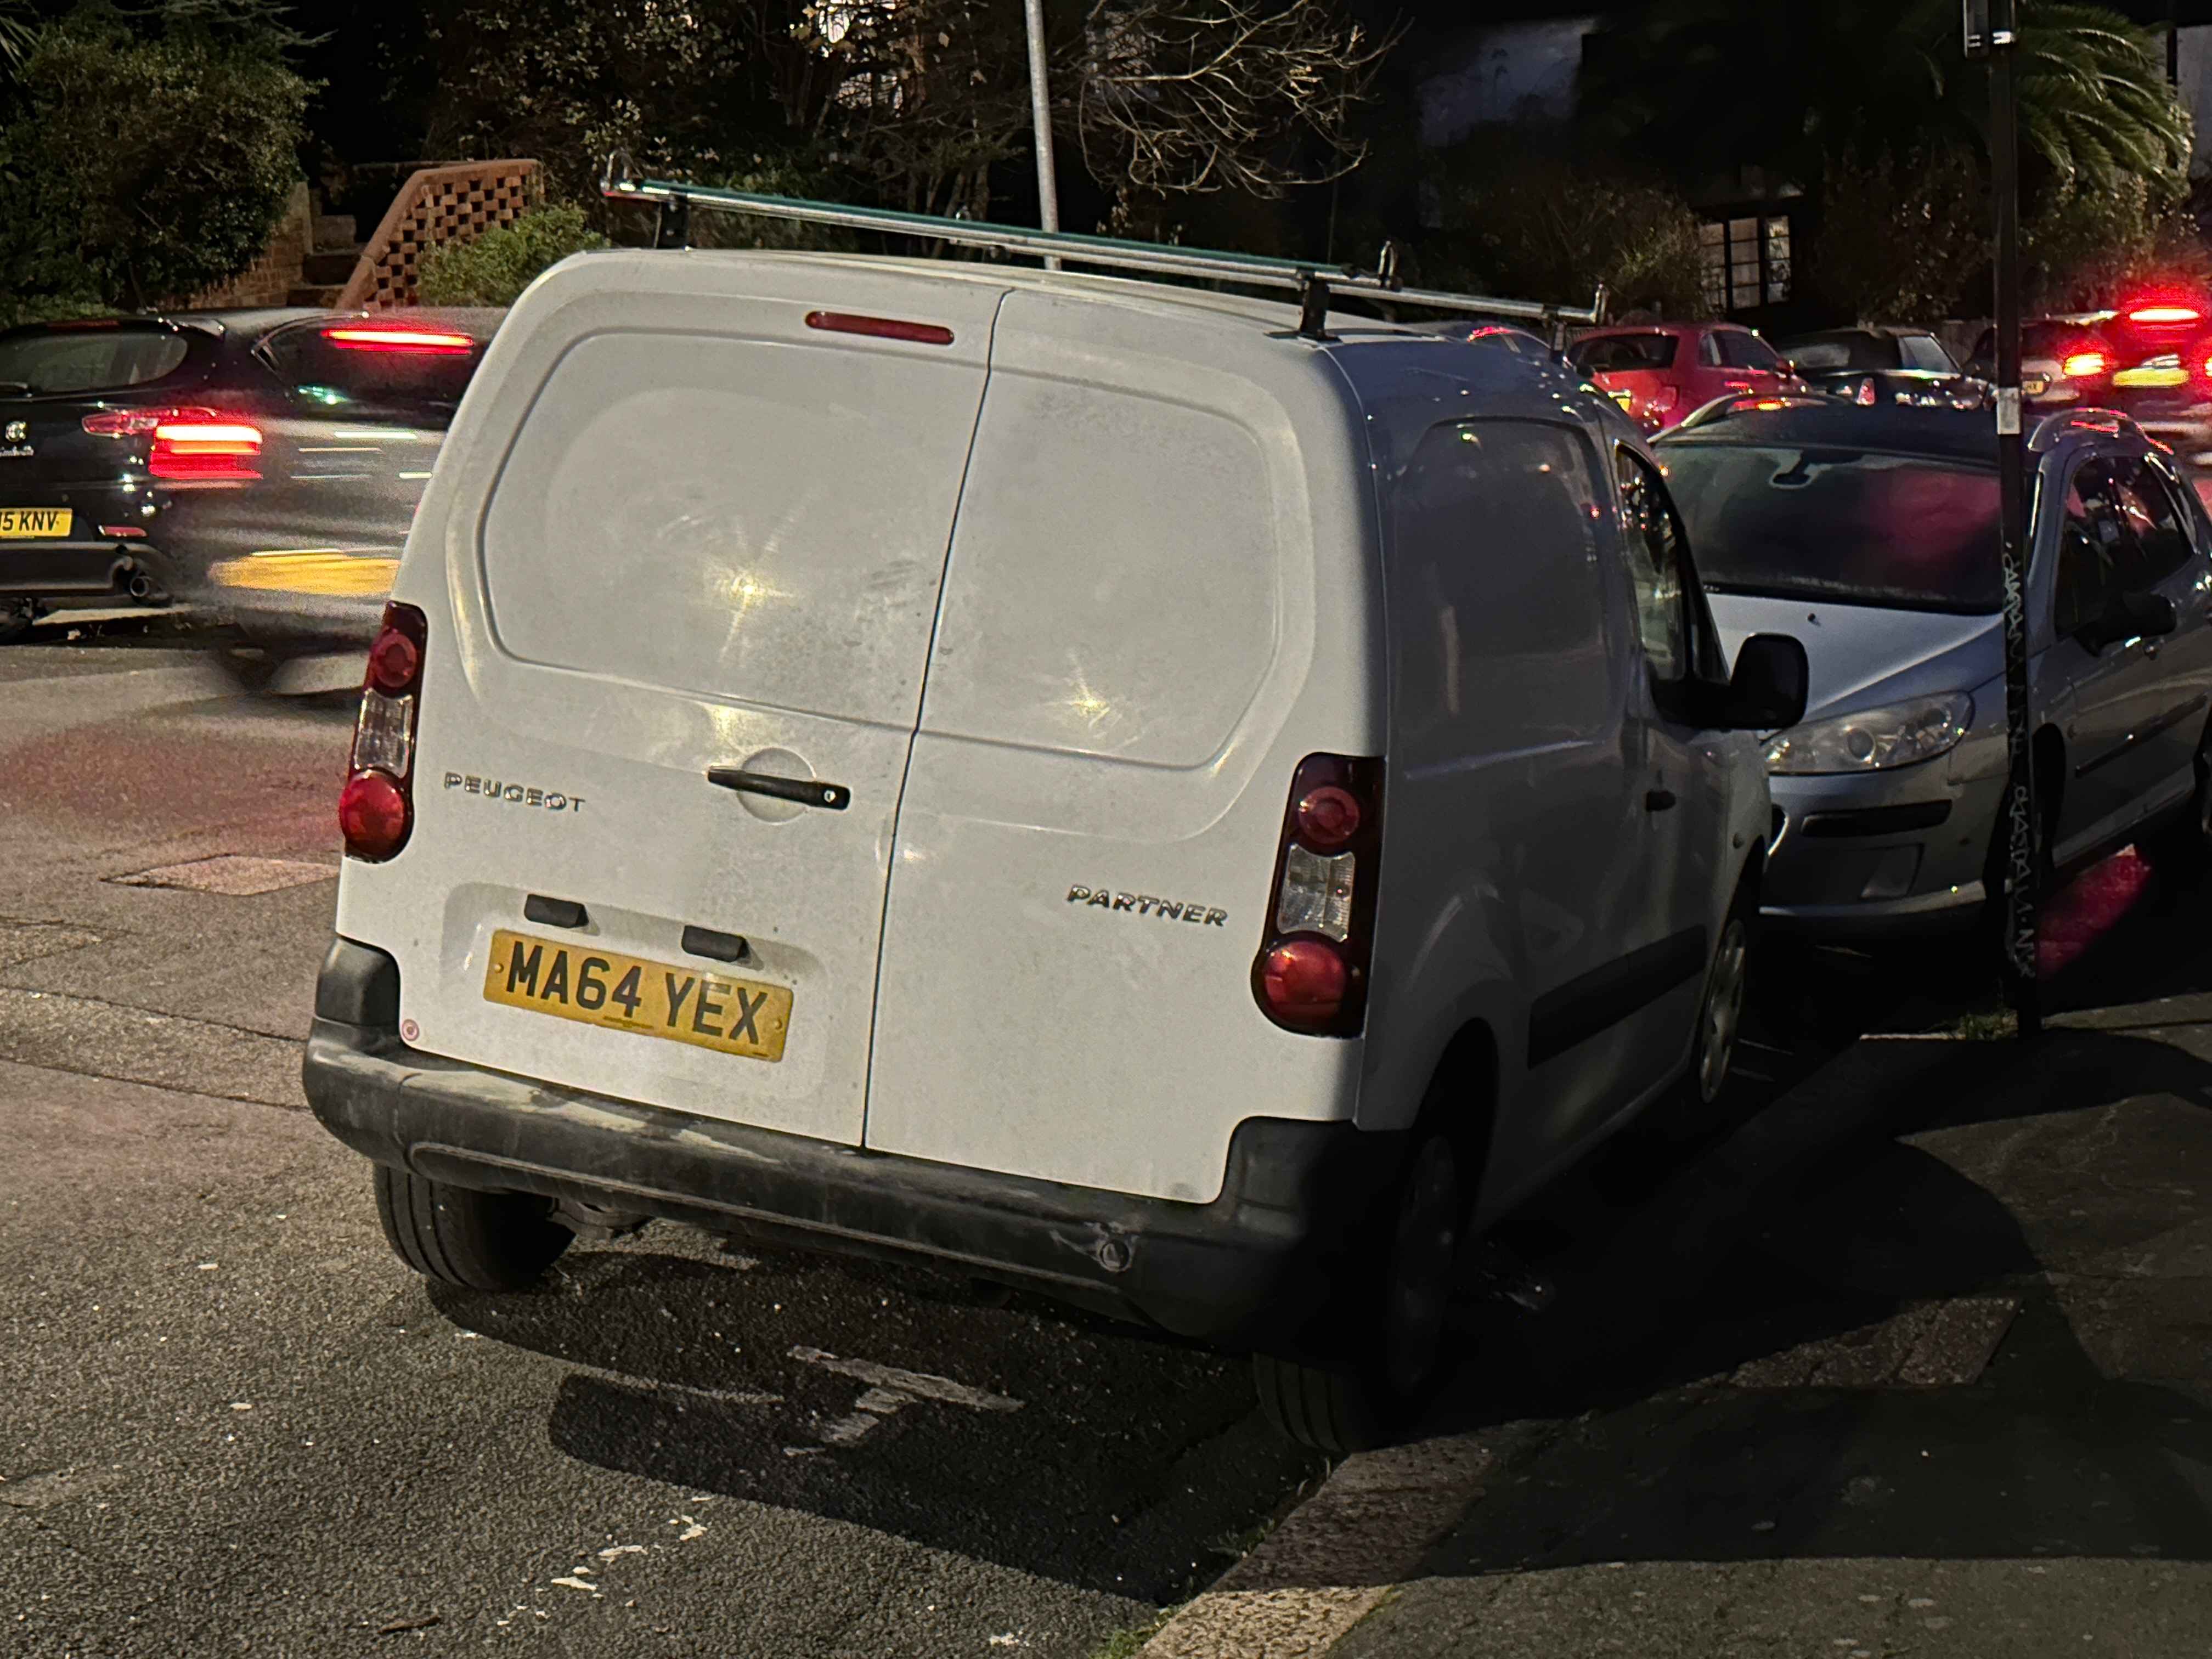 Photograph of MA64 YEX - a White Peugeot Partner parked in Hollingdean by a non-resident. The second of six photographs supplied by the residents of Hollingdean.